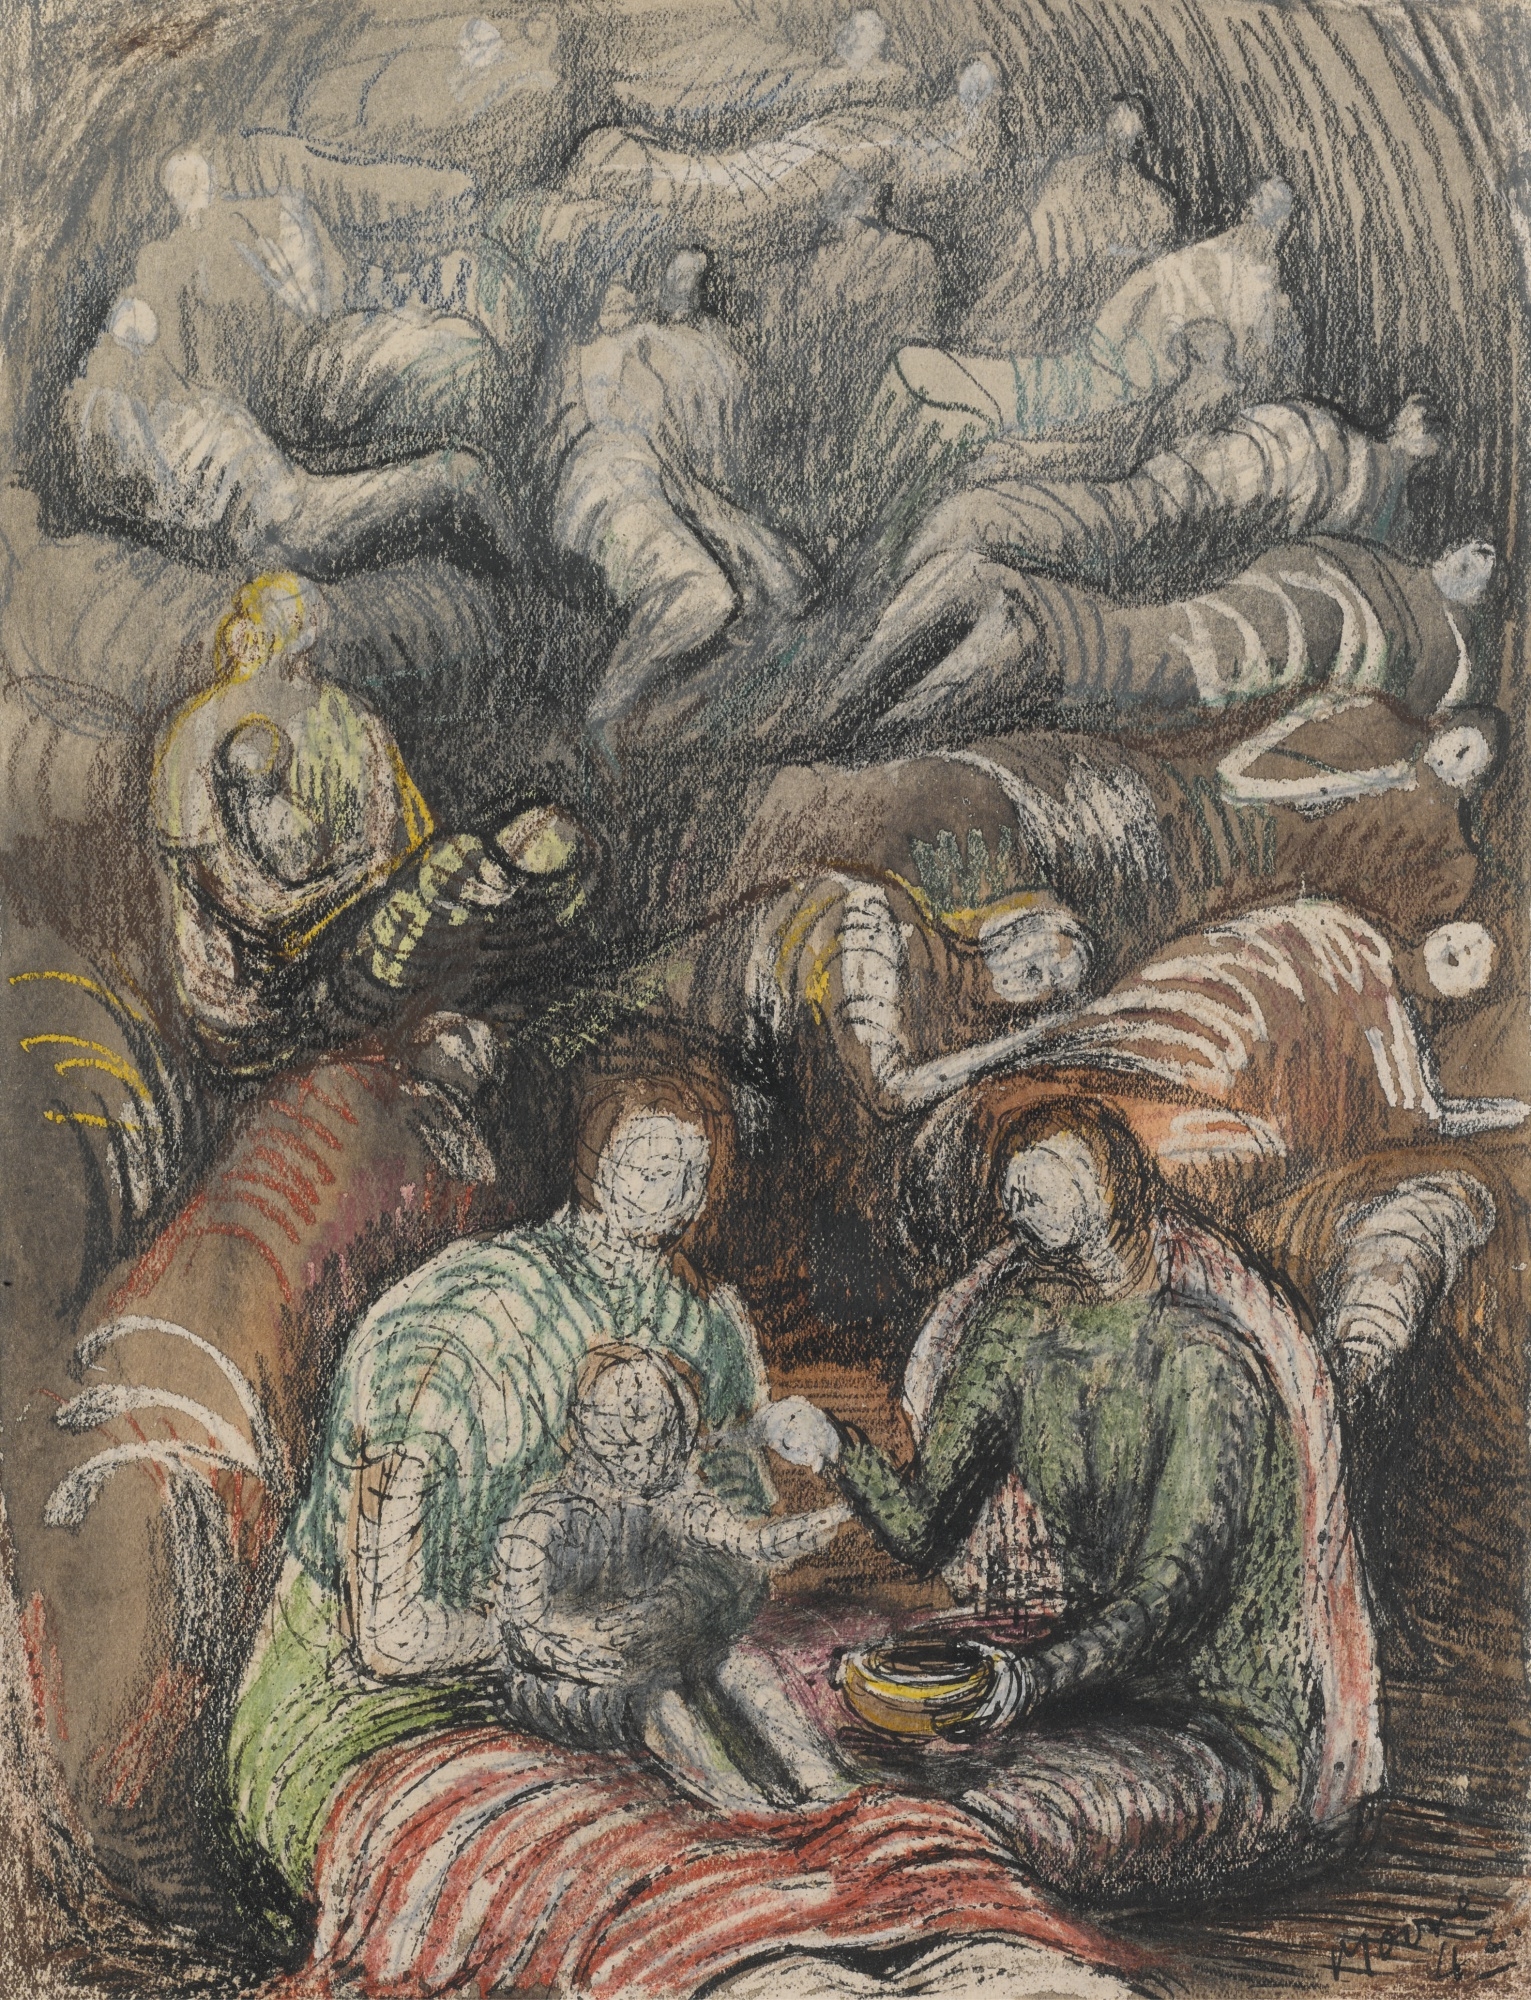 SHELTER DRAWING by Henry Moore, 1942